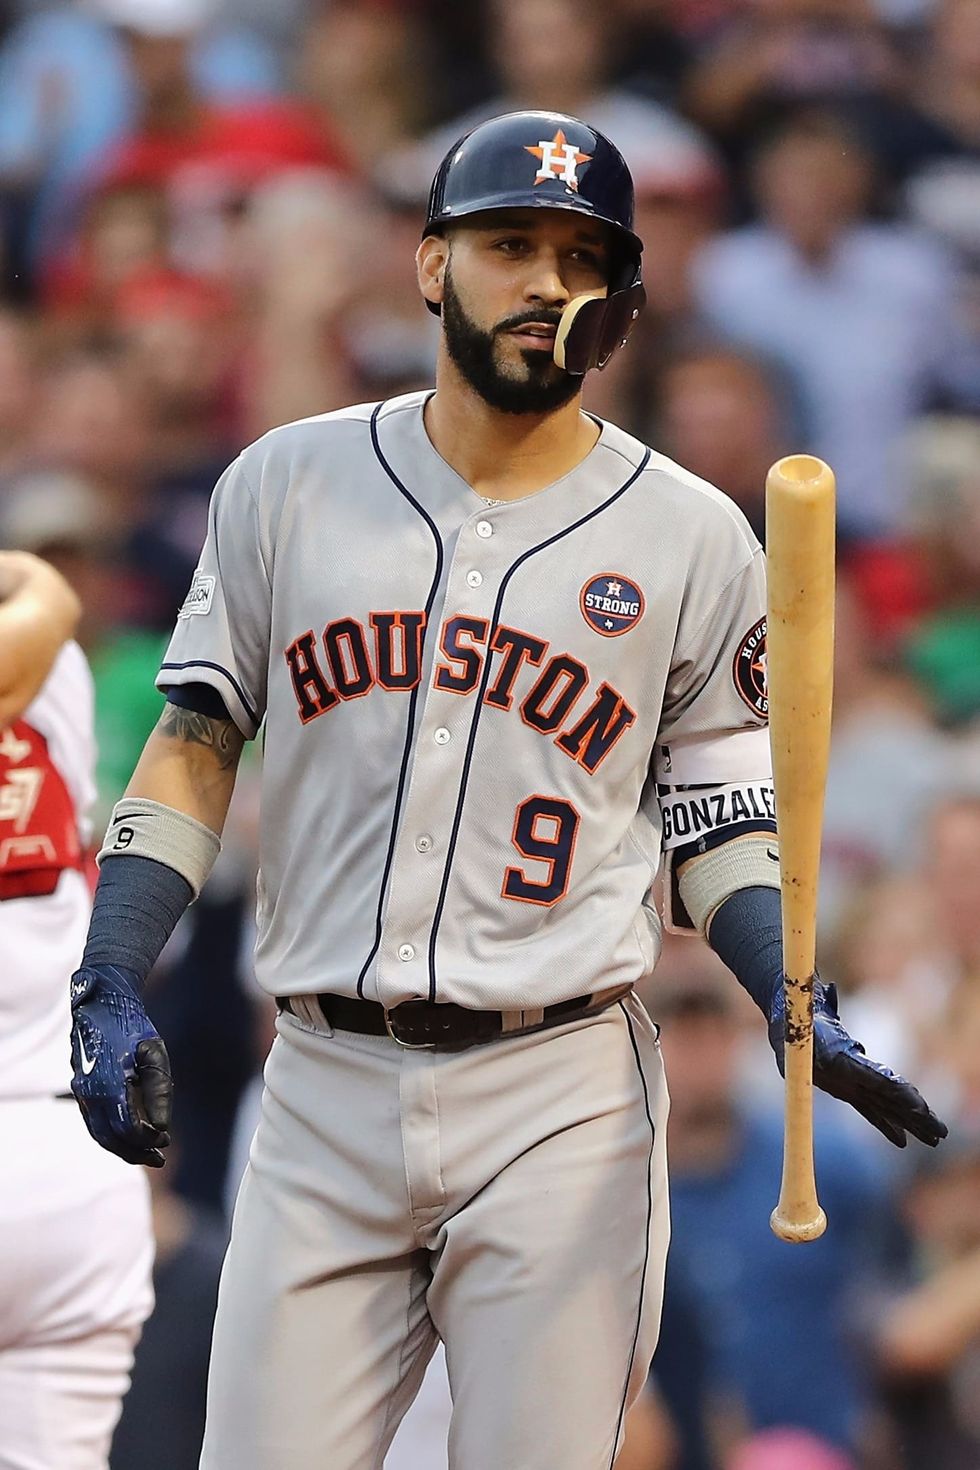 Angry at the Astros for their lack of hitting? Not as much as this guy